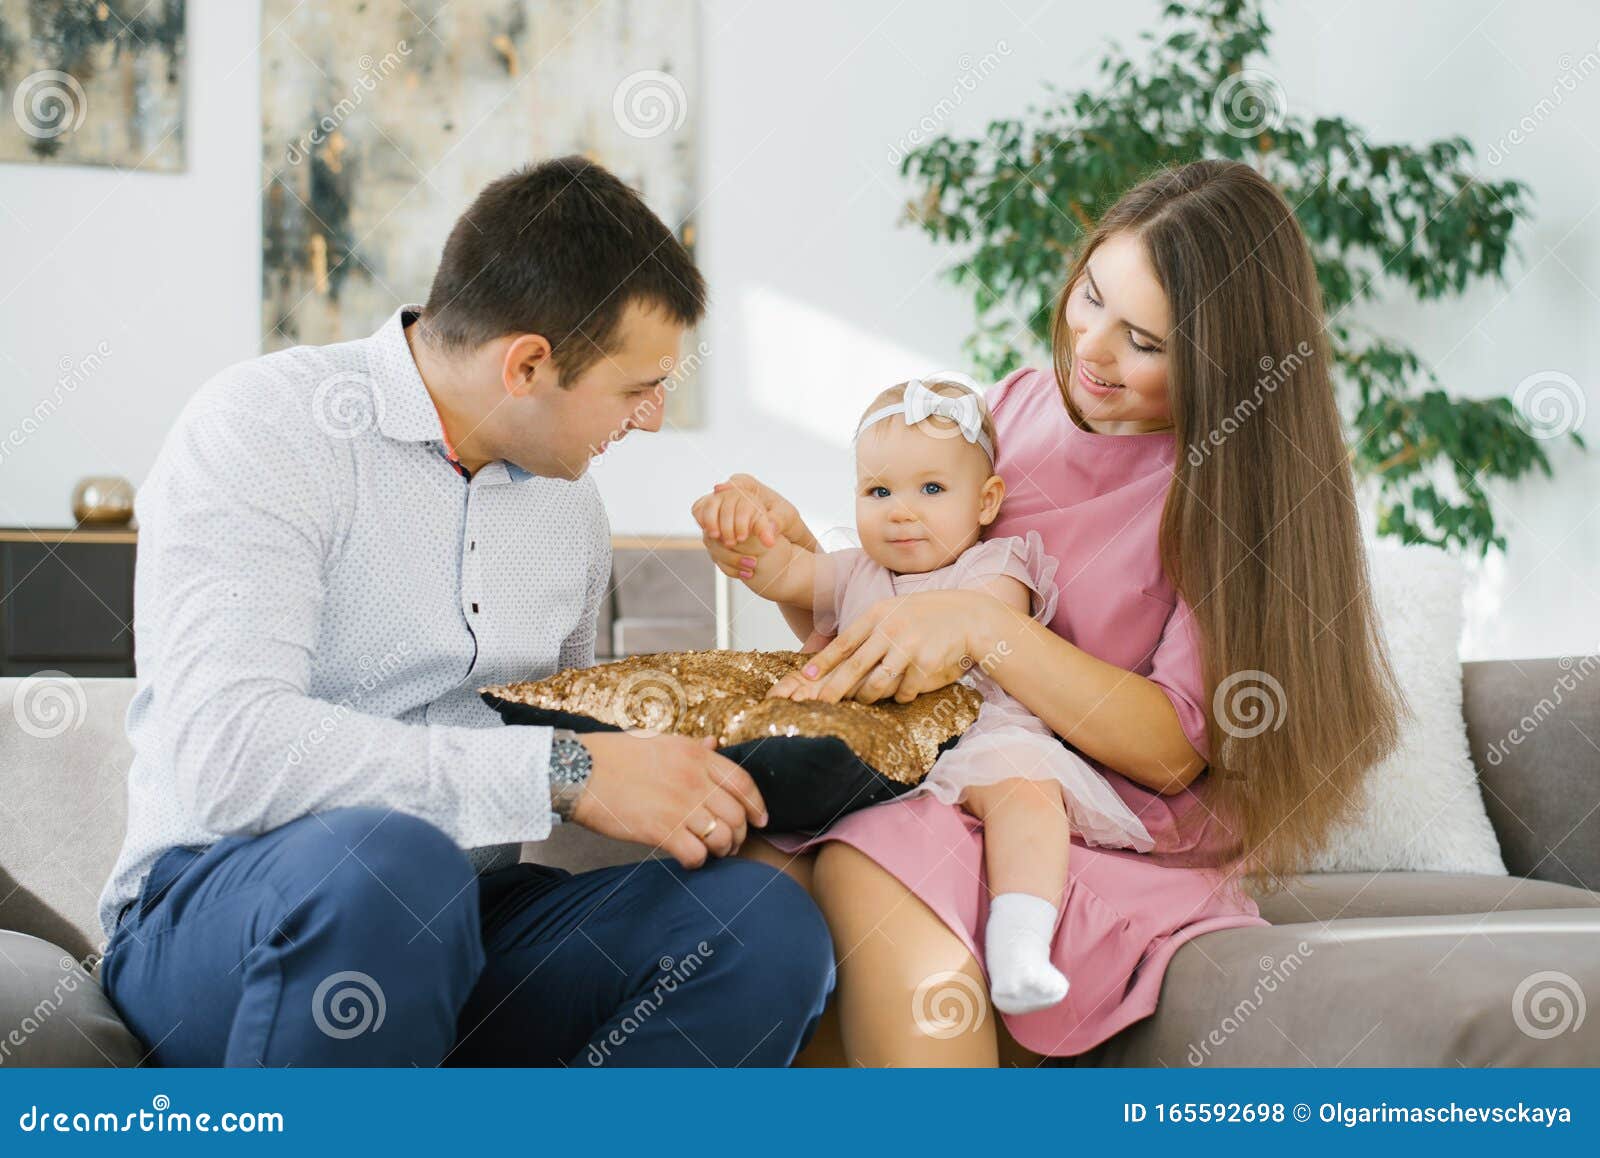 young parents mom dad play their one year old daughter living room home 165592698